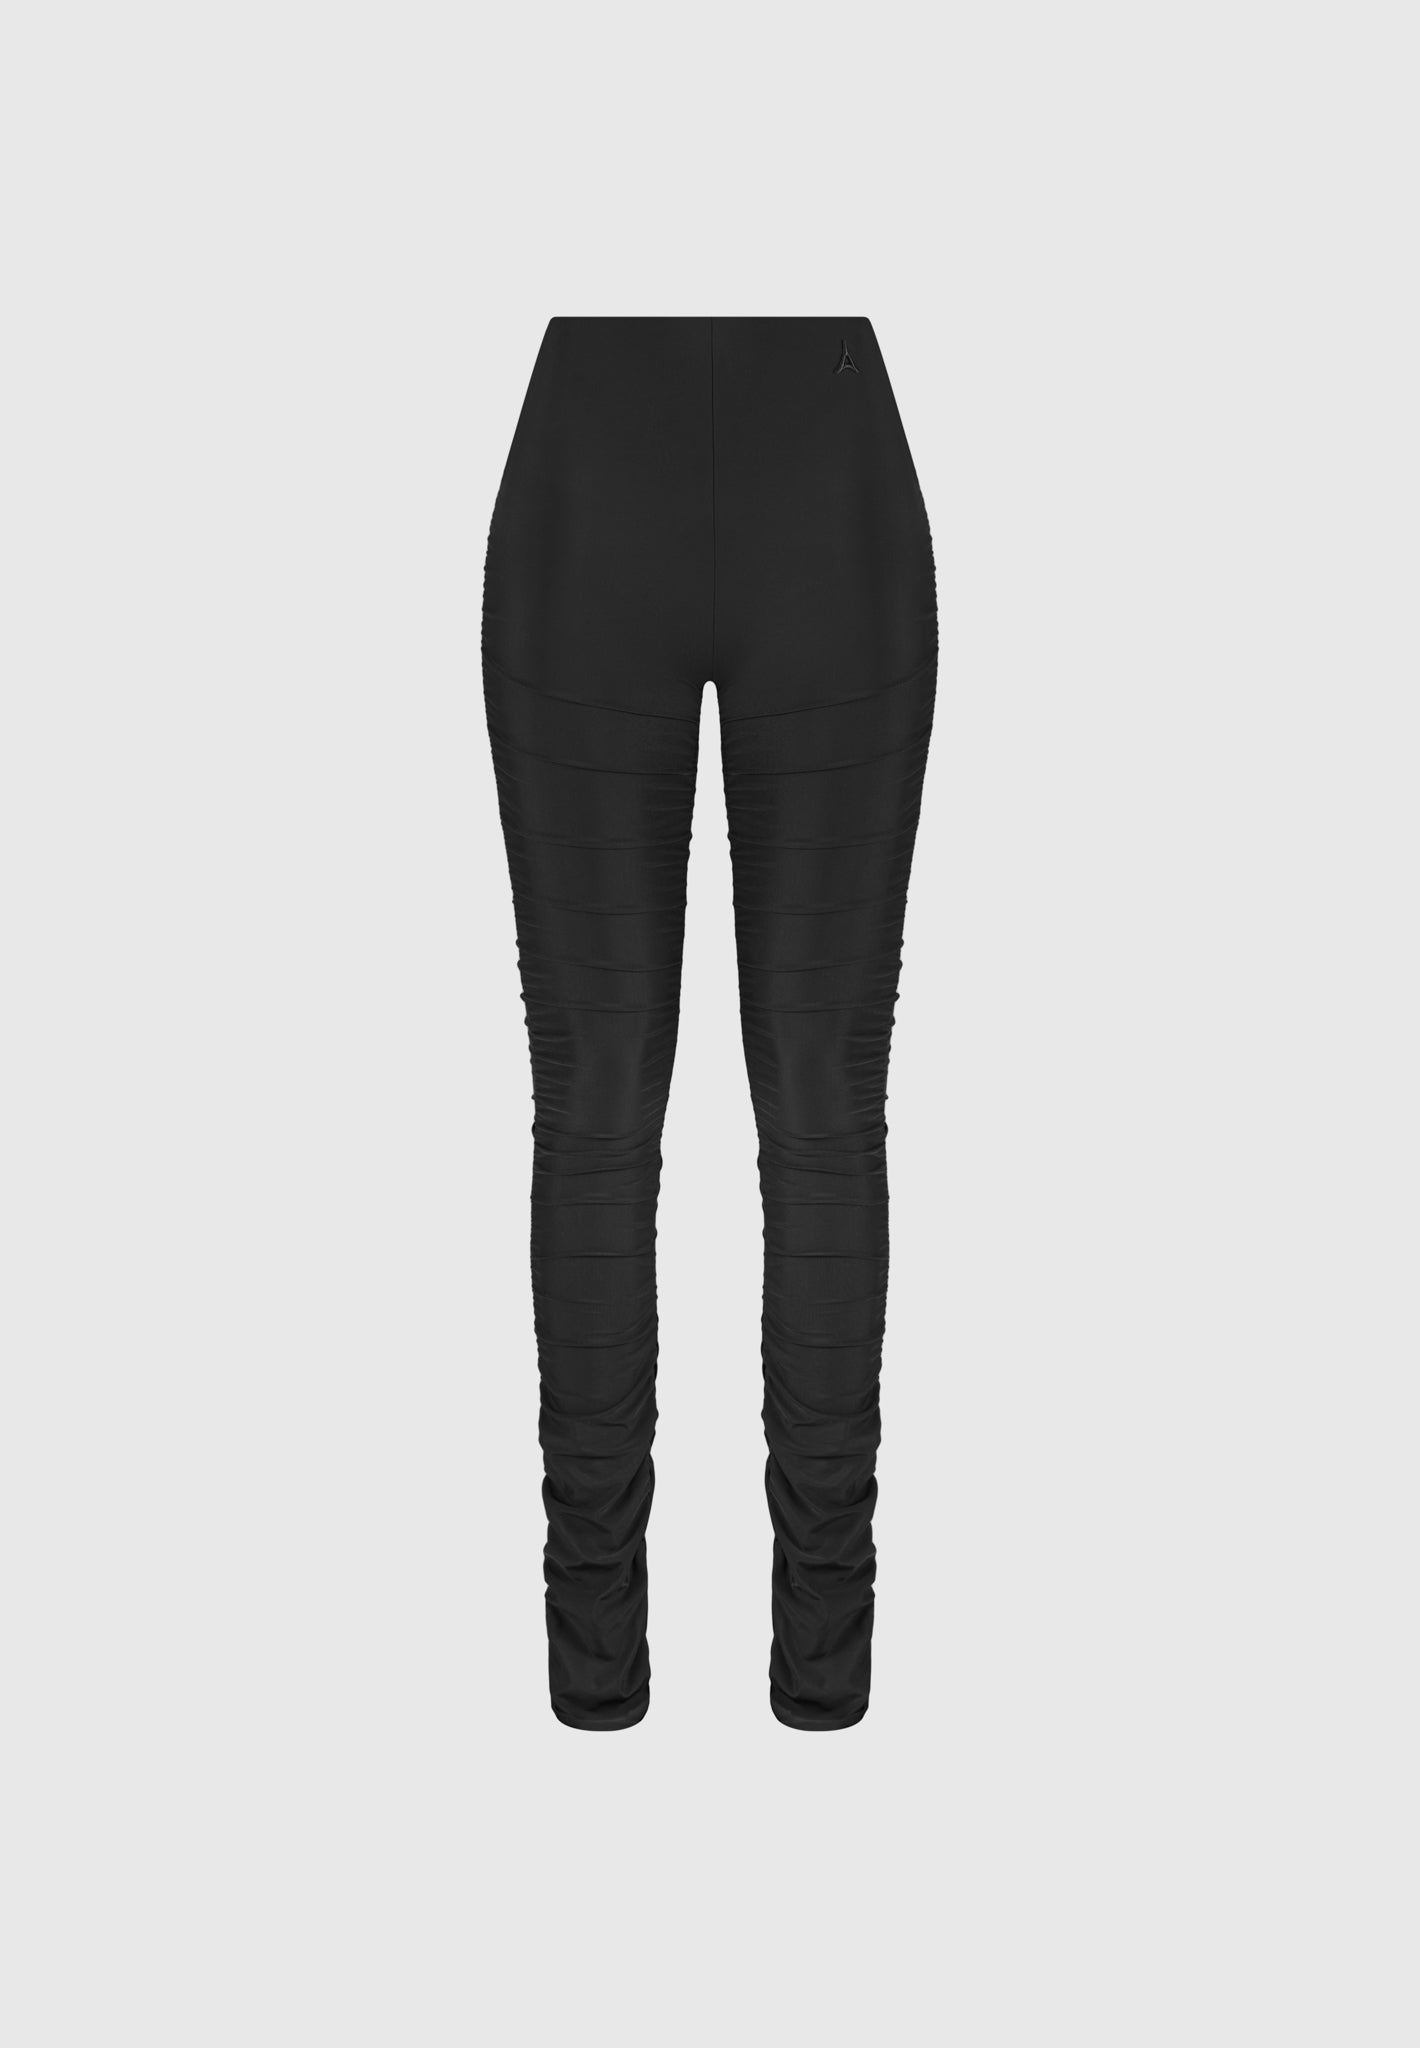 ruched-fit-and-flare-leggings-black